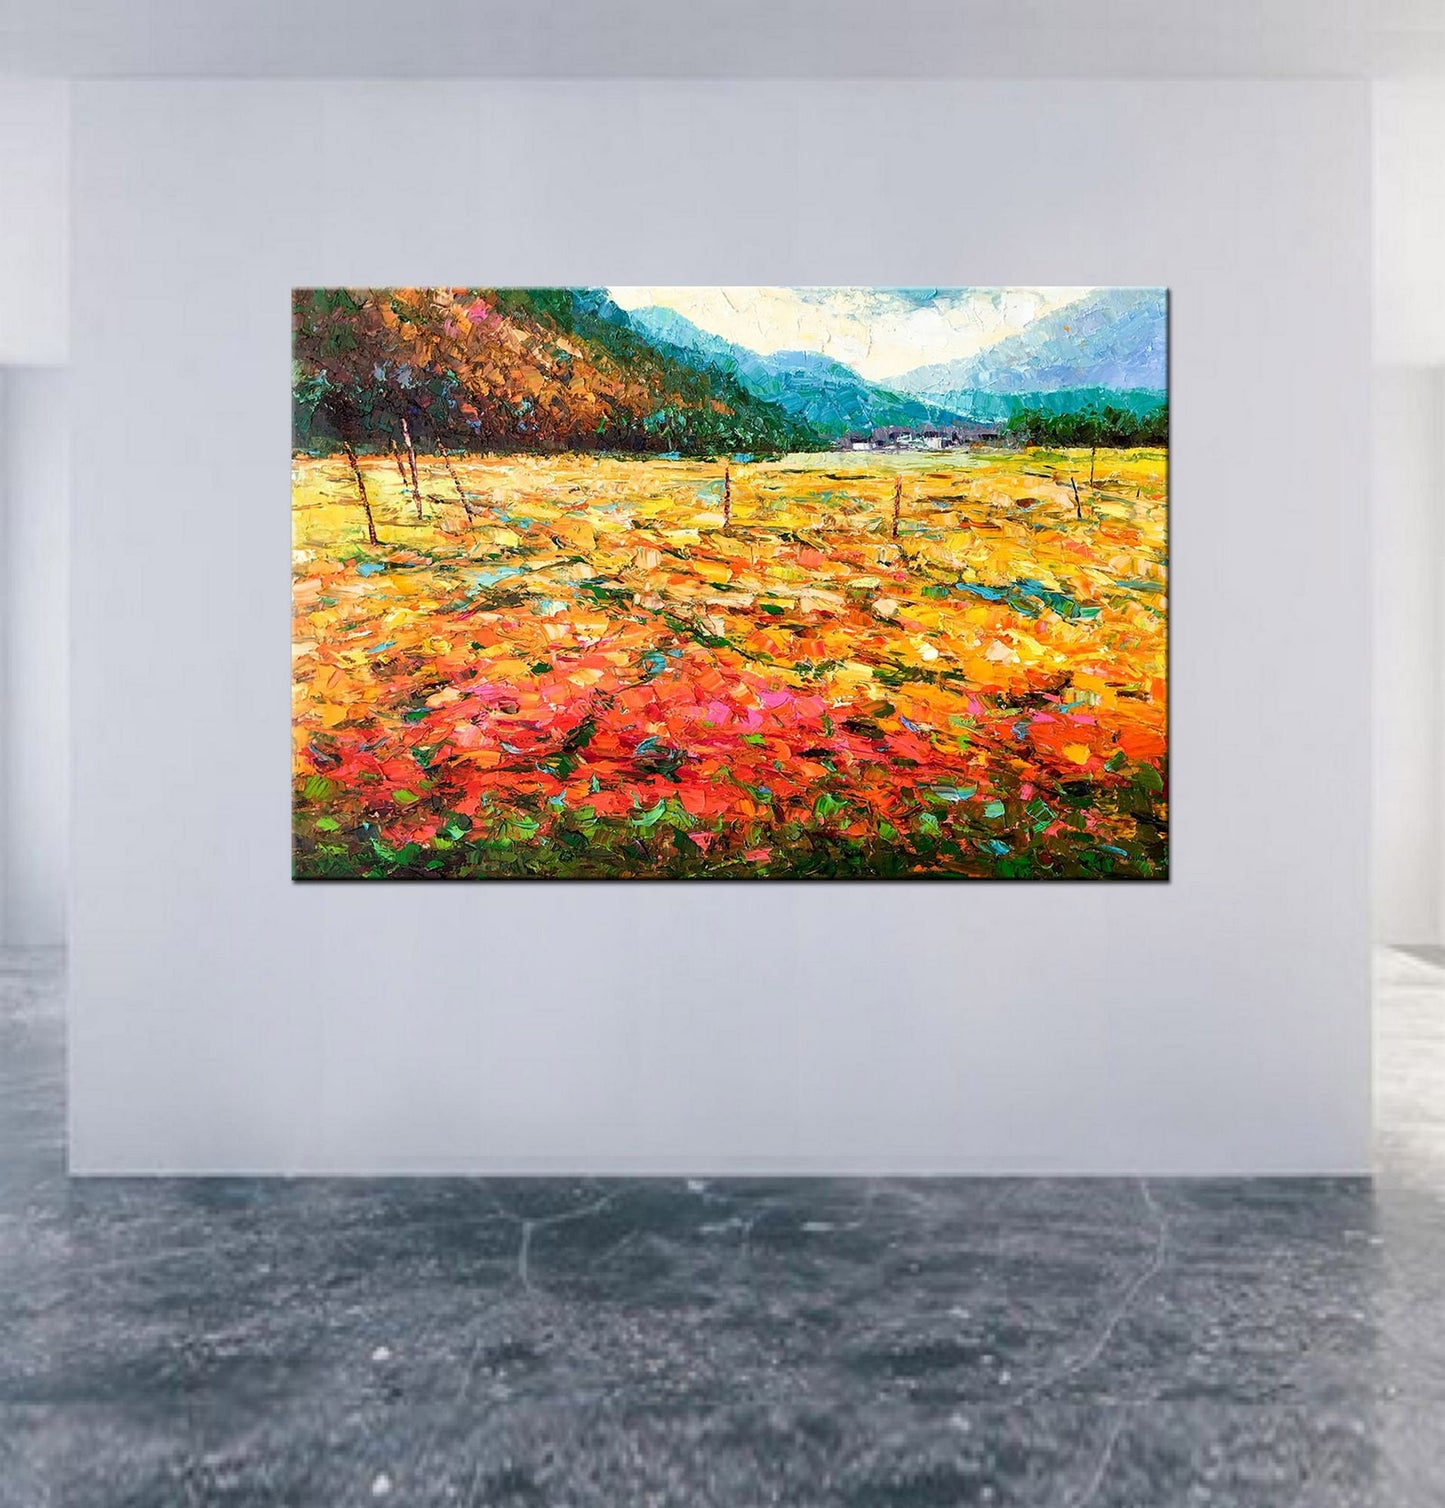 Large Oil Painting Landscape Spring Fields by the Mountain, Large Canvas Wall Art, Original Oil Painting, Original Landscape Painting Yellow